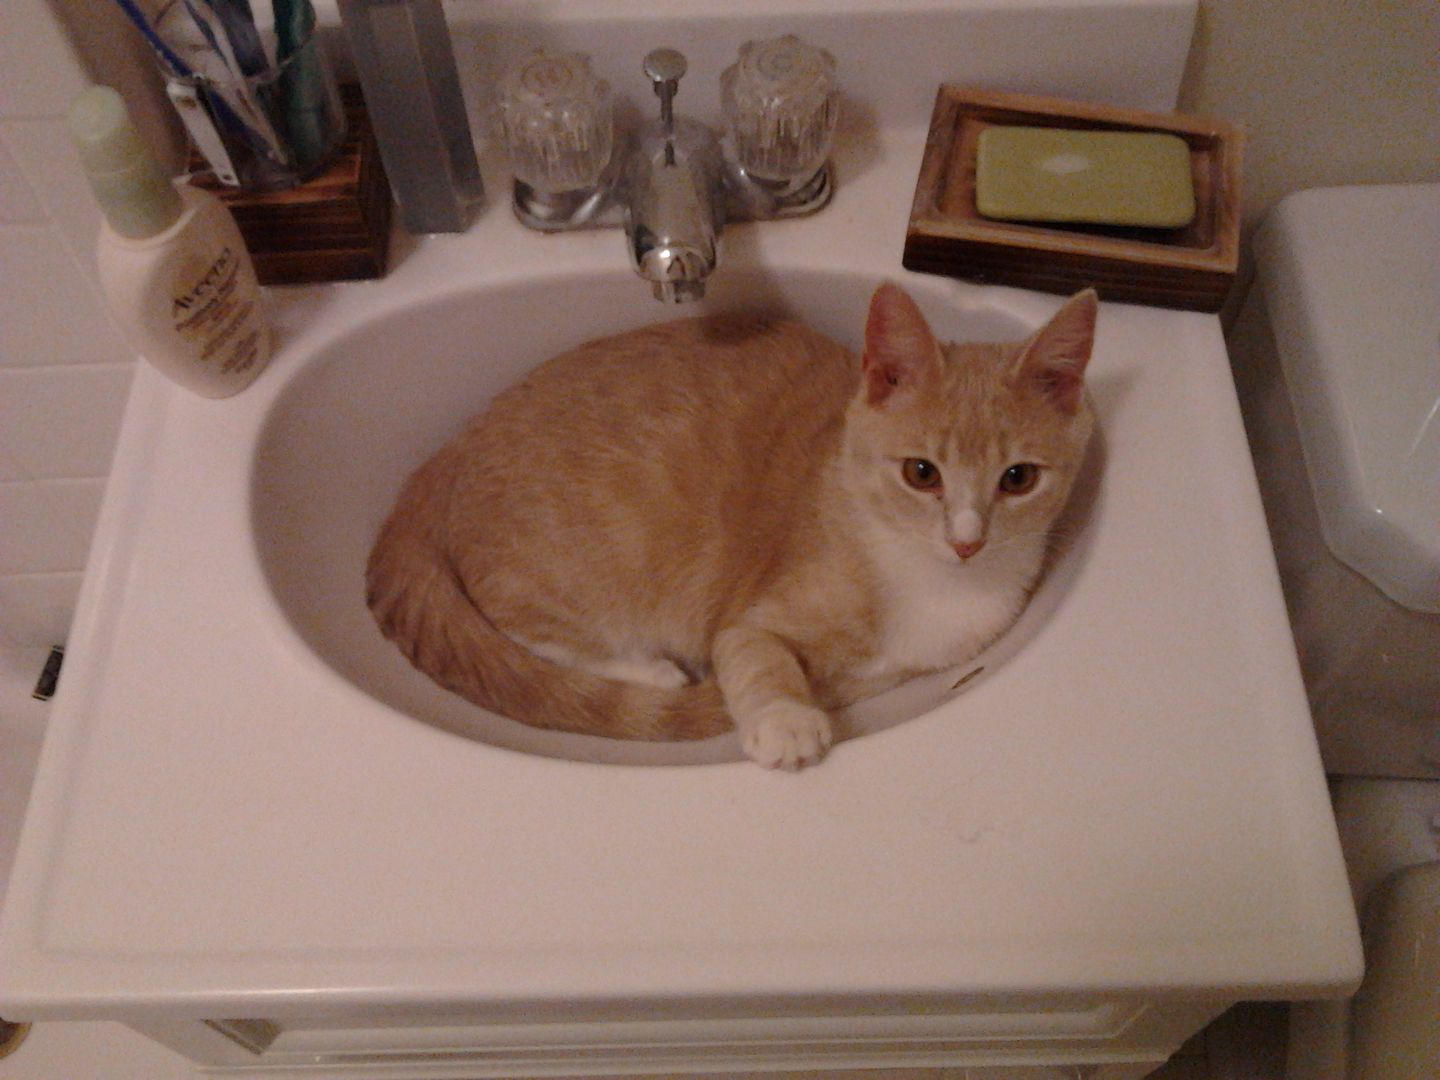 Jack in the sink